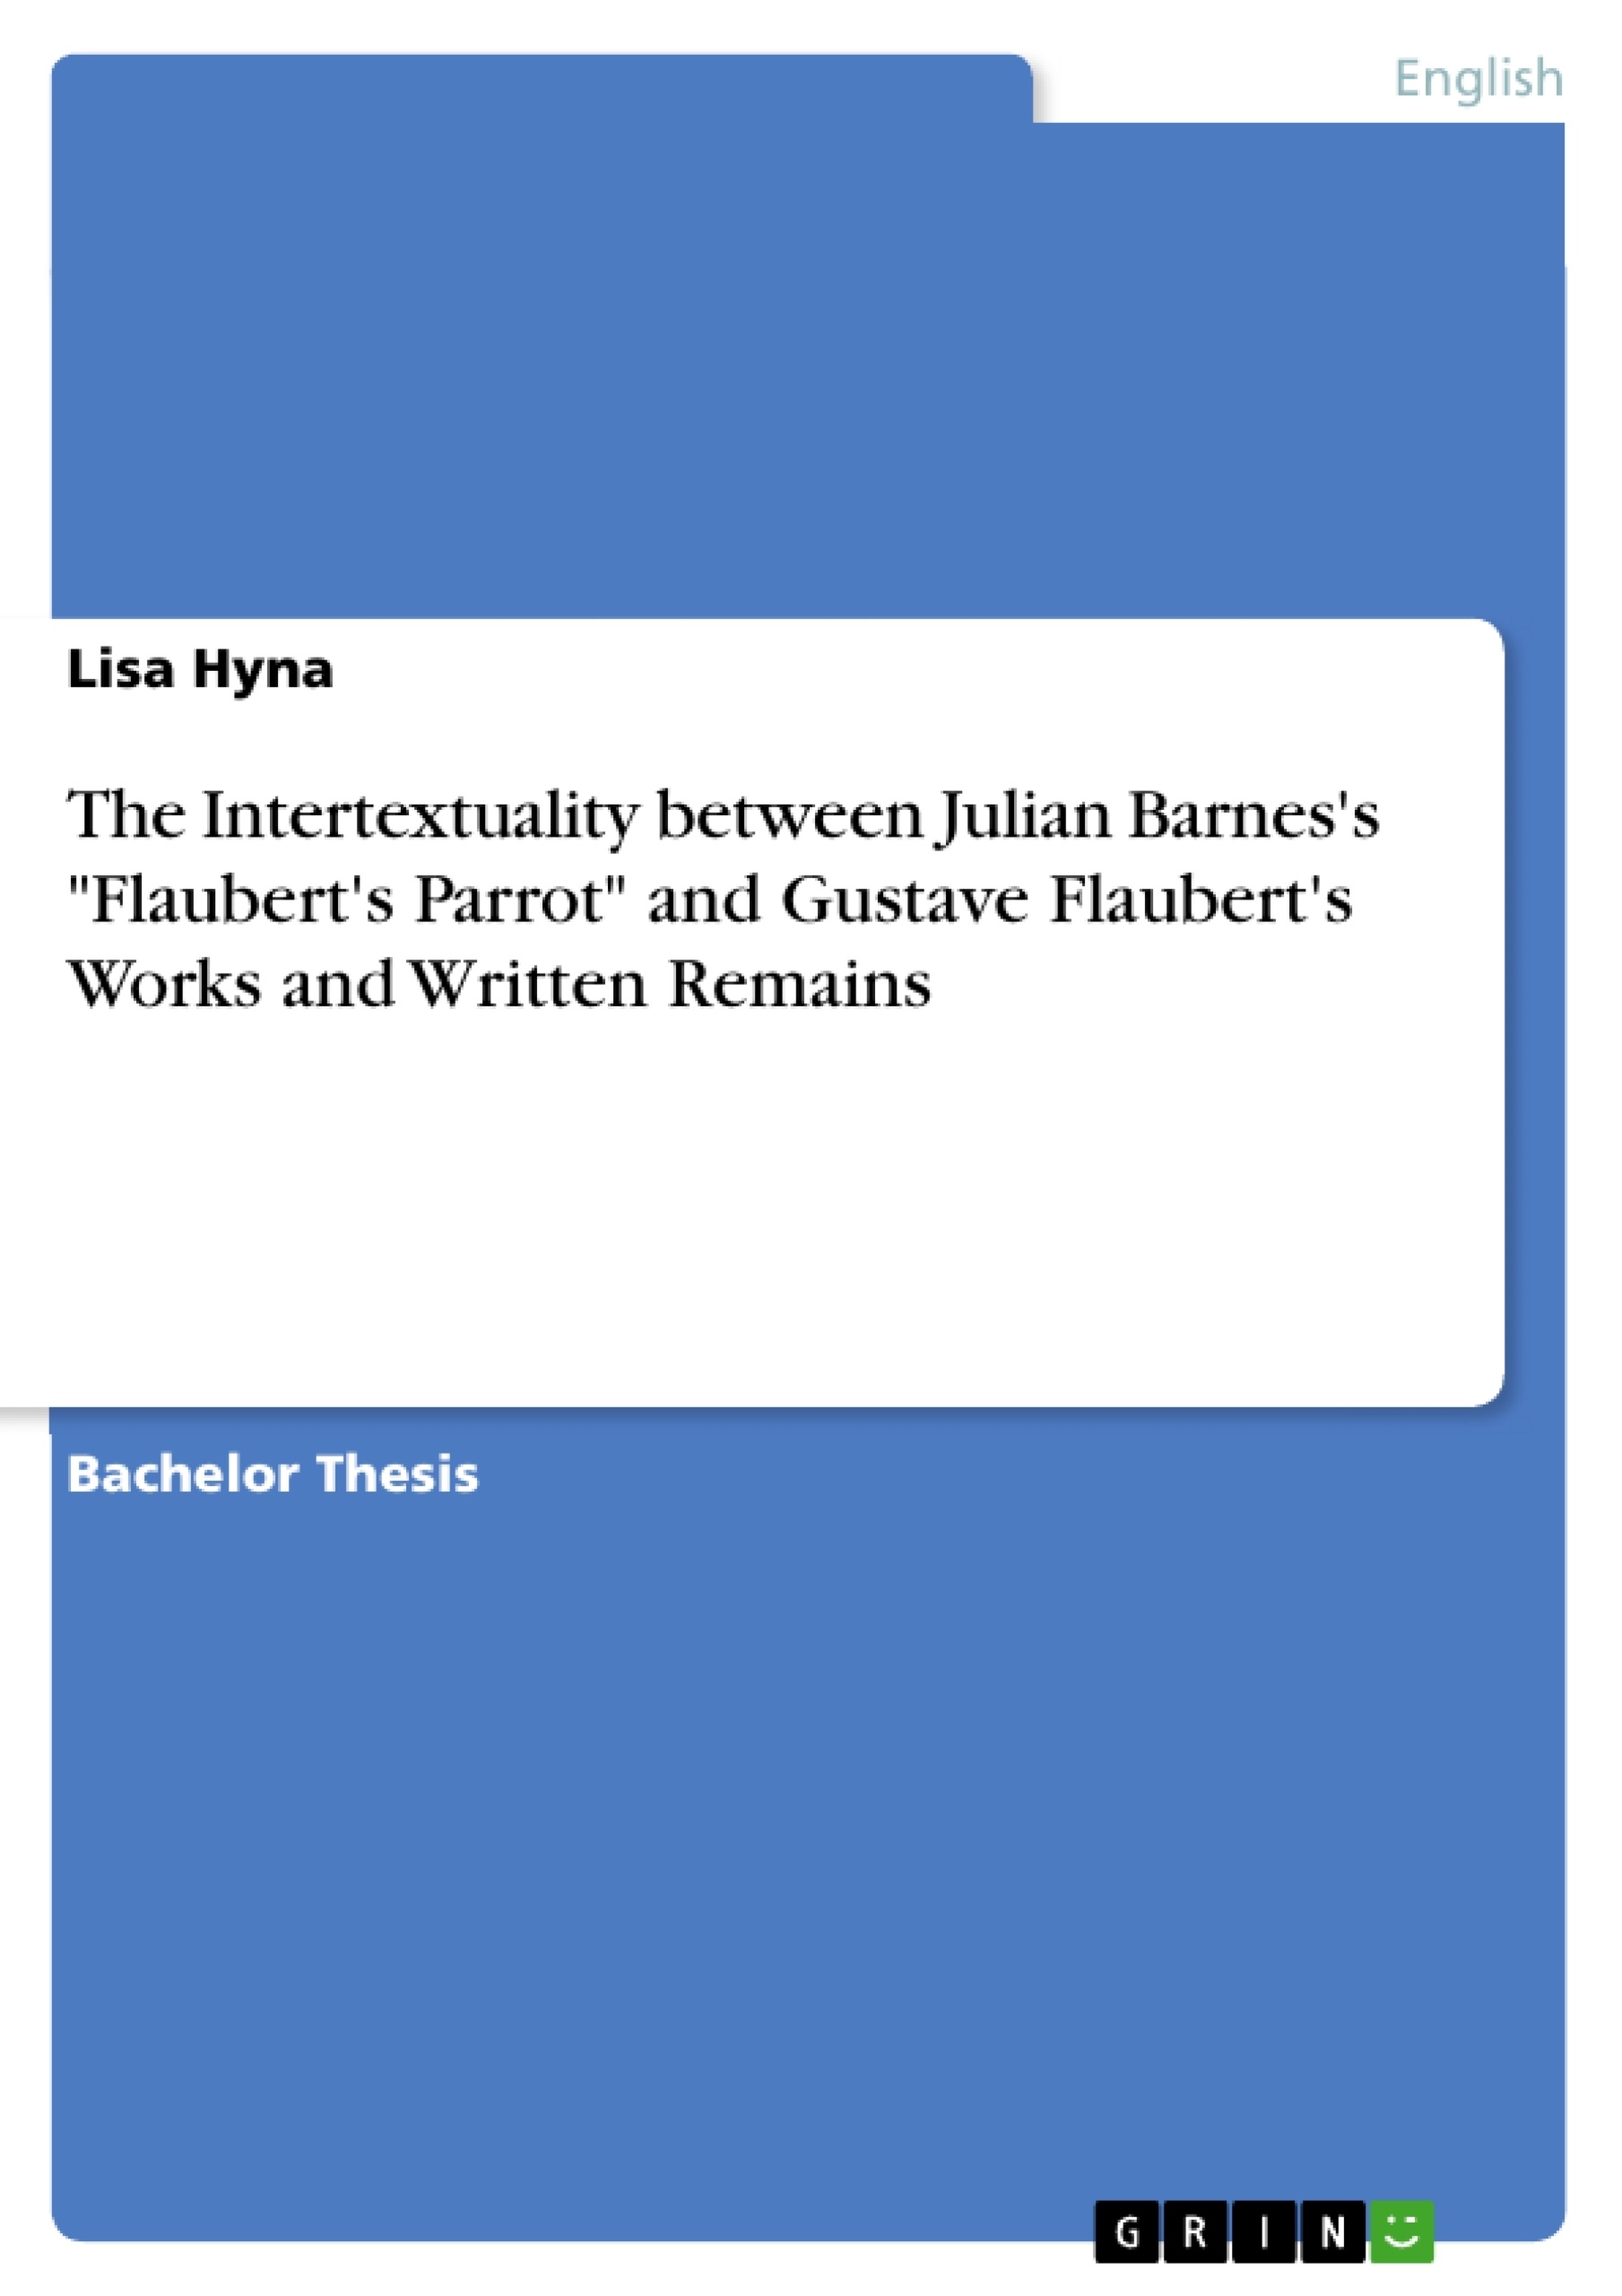 Title: The Intertextuality between Julian Barnes's  "Flaubert's Parrot" and Gustave Flaubert's Works and Written Remains